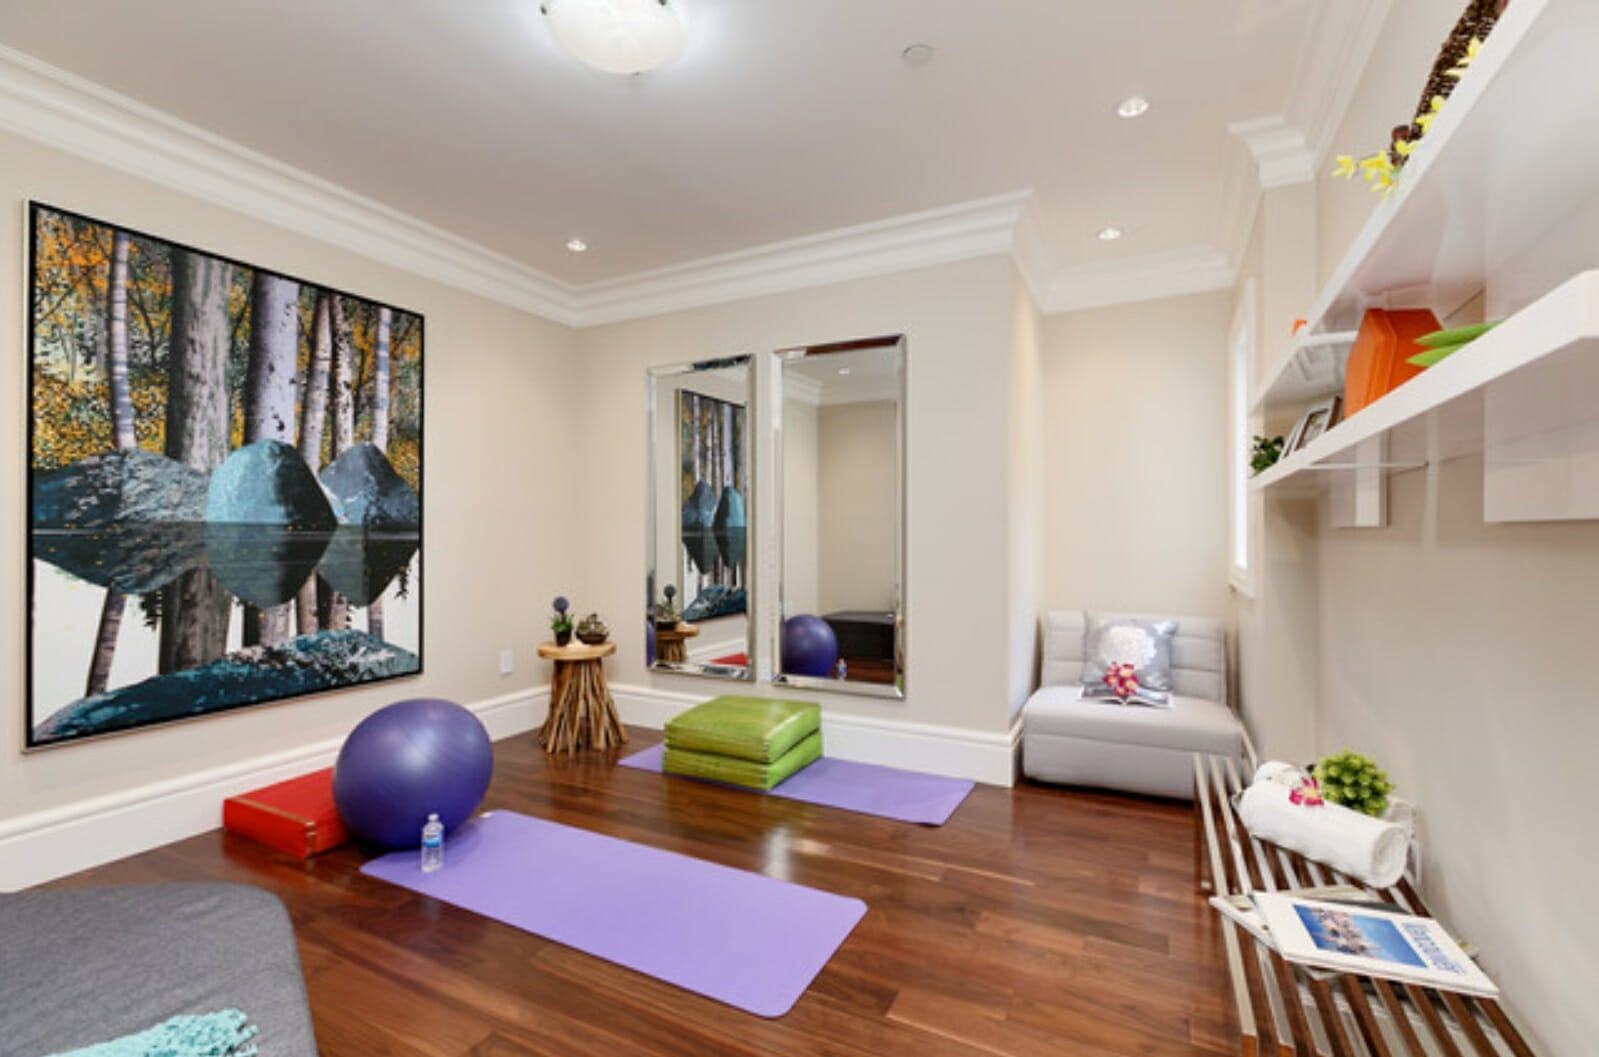 Before & After: Colorful and Calming Yoga Room Design - Decorilla